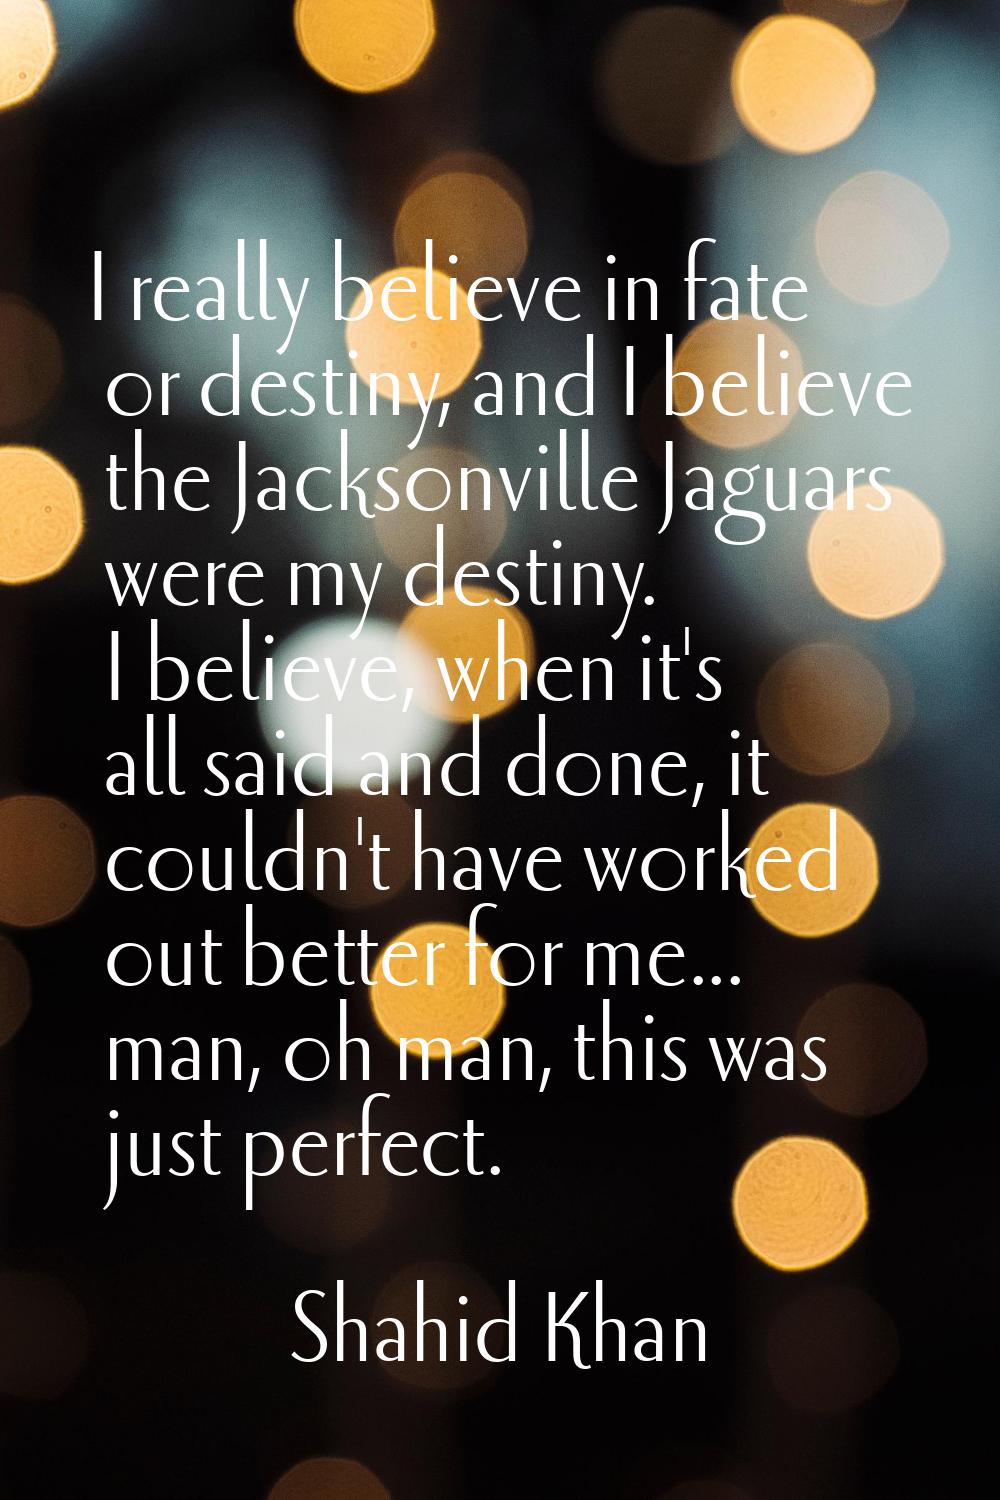 I really believe in fate or destiny, and I believe the Jacksonville Jaguars were my destiny. I beli